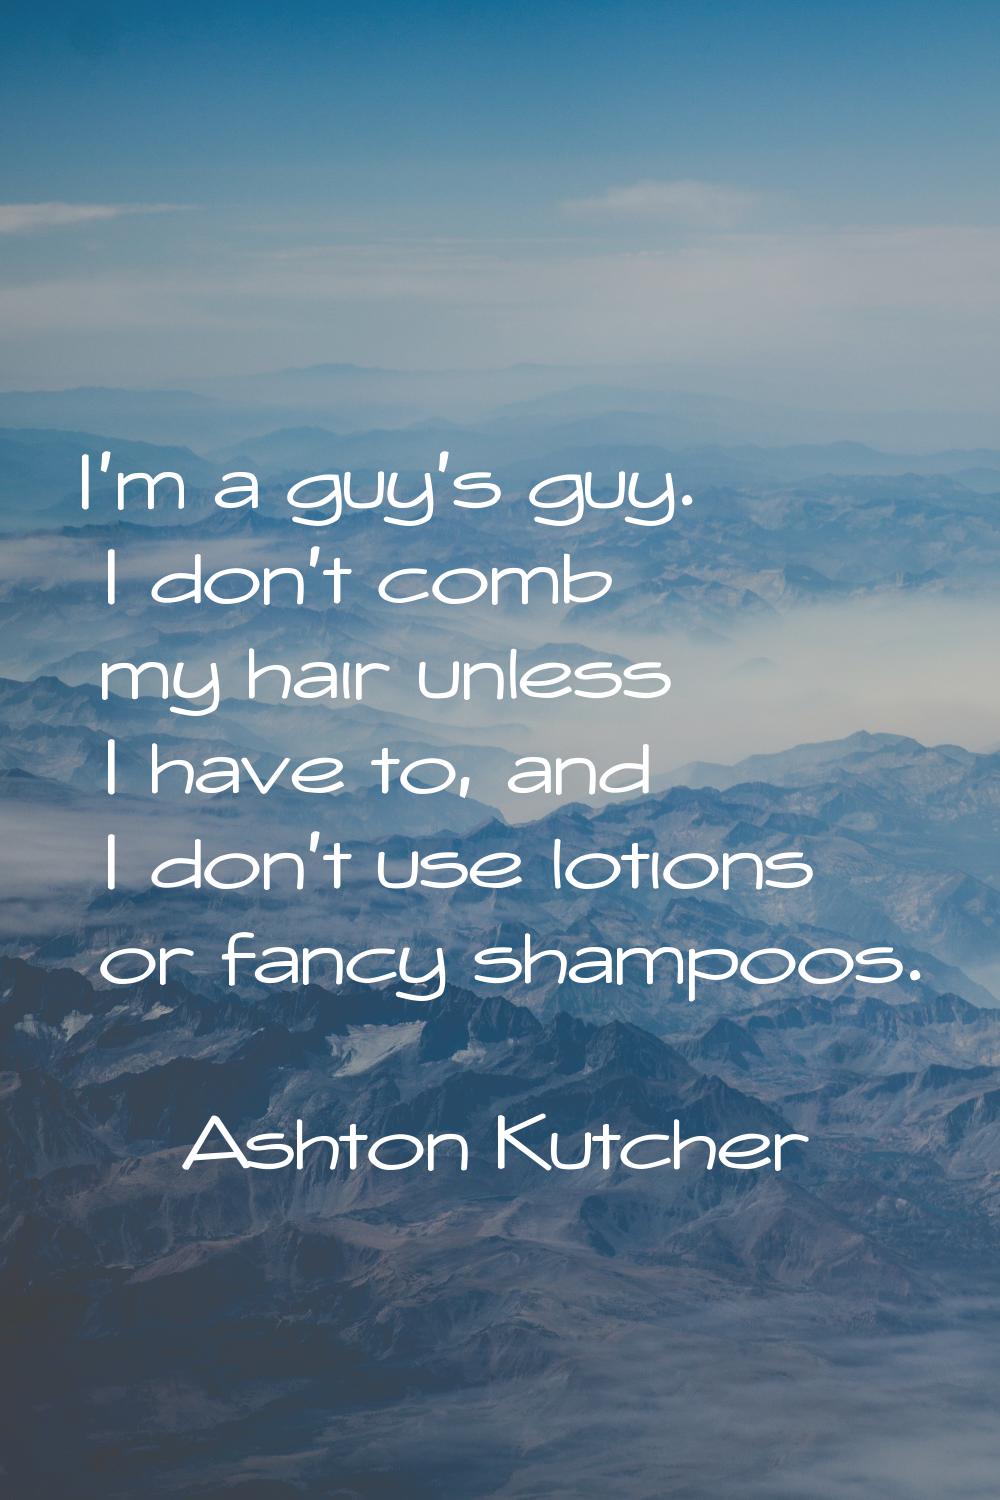 I'm a guy's guy. I don't comb my hair unless I have to, and I don't use lotions or fancy shampoos.